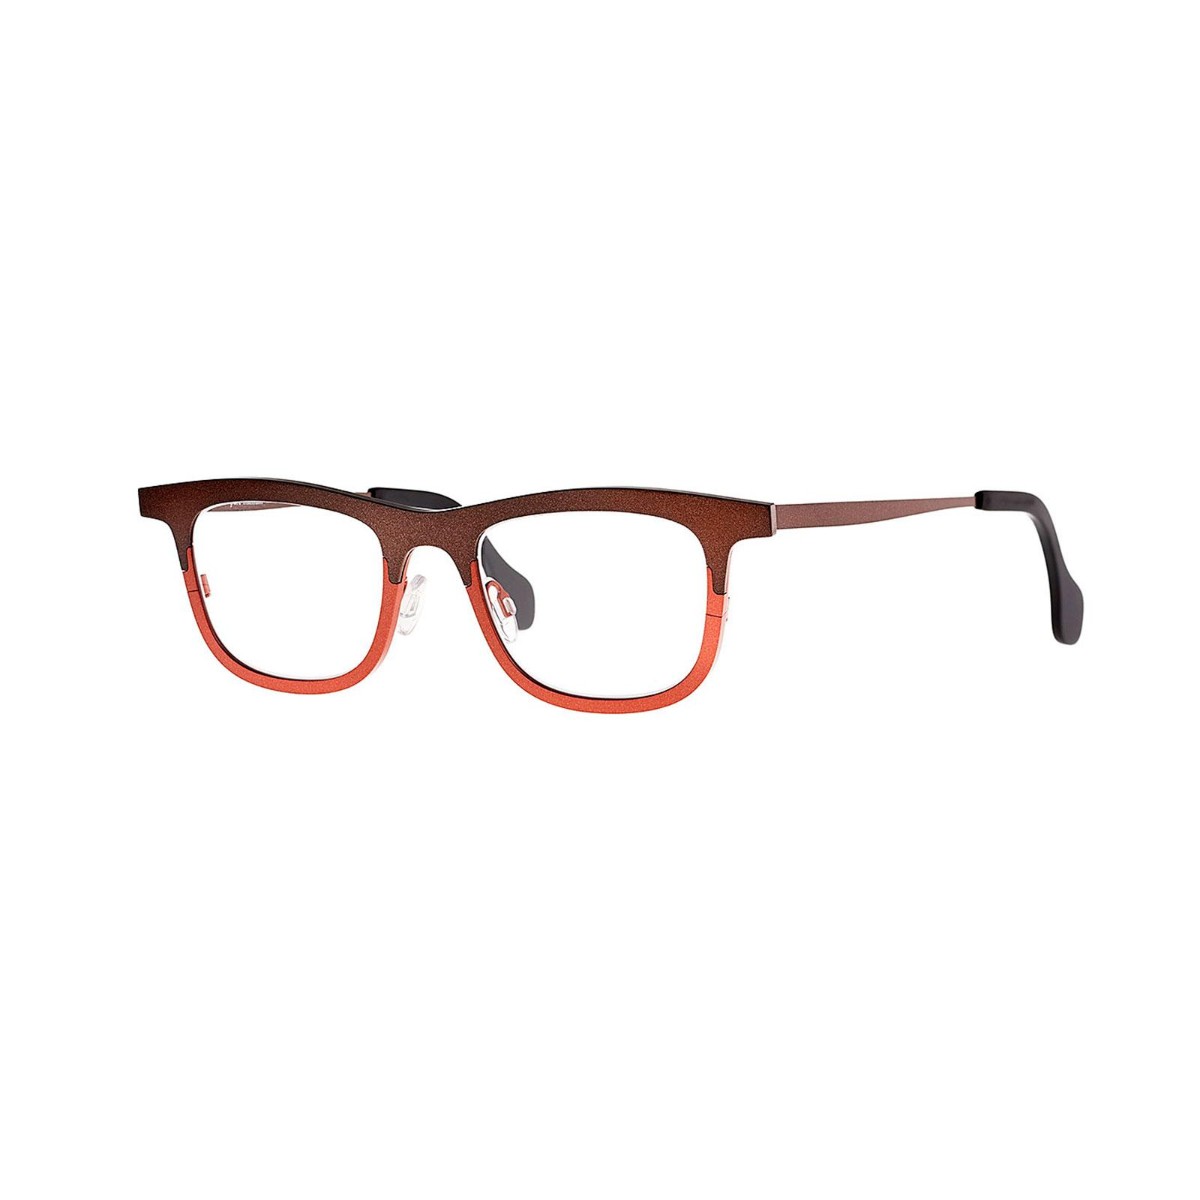 Theo - Mille+54 431 Brown/Bronze